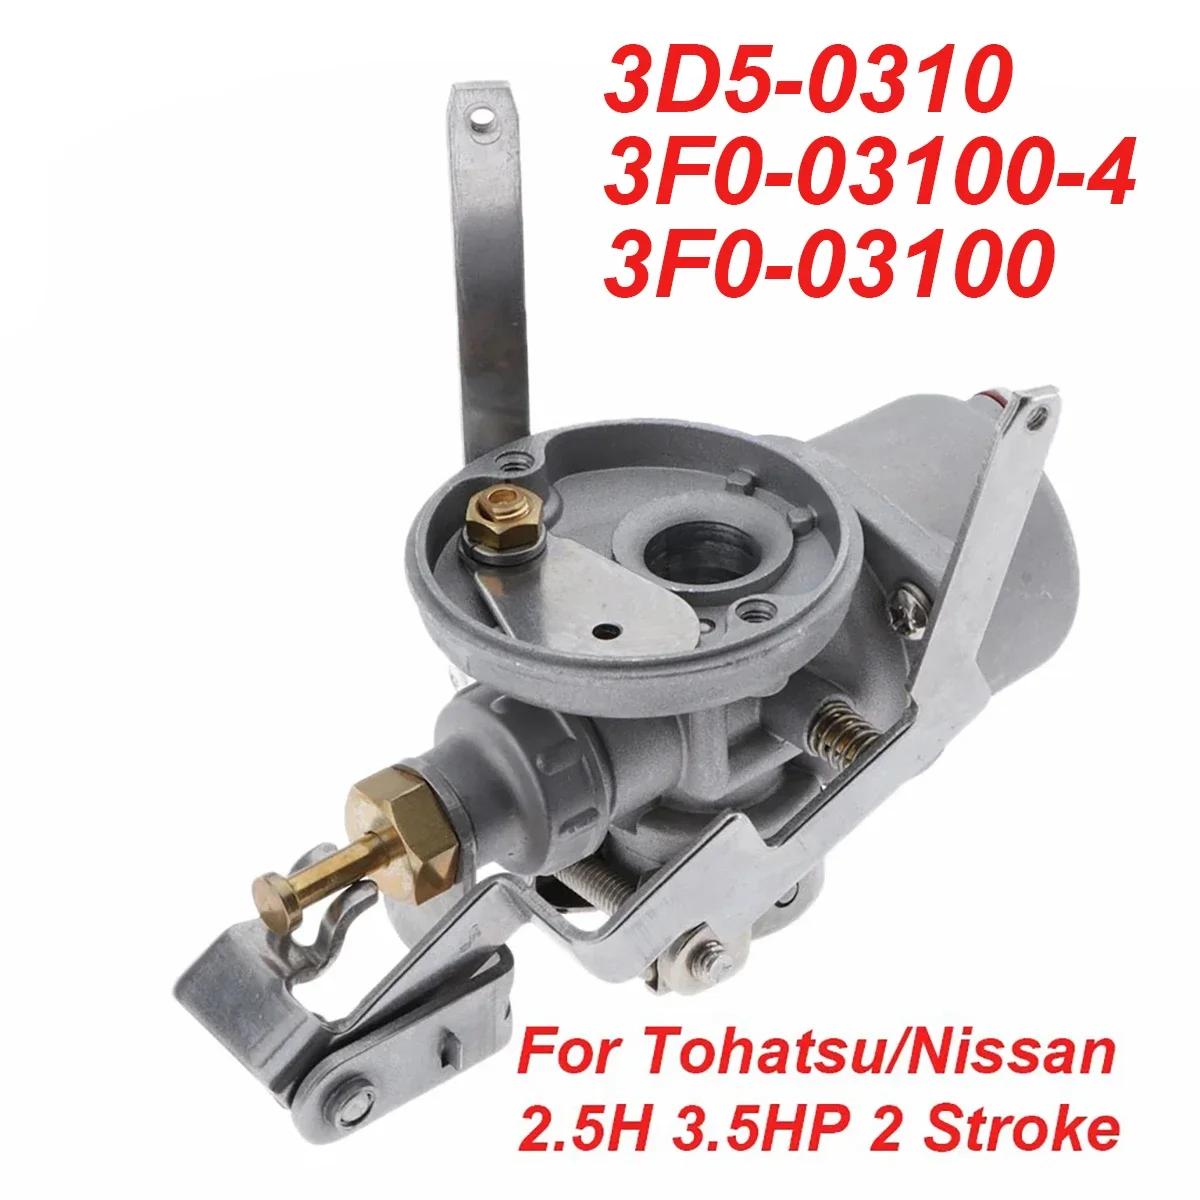 

3D5-0310 3F0-03100-4 3F0-03100 Carburetor For Tohatsu/Nissan 2 Stroke 3.5HP 2.5HP Outboard Engine Motor Boat Accessories